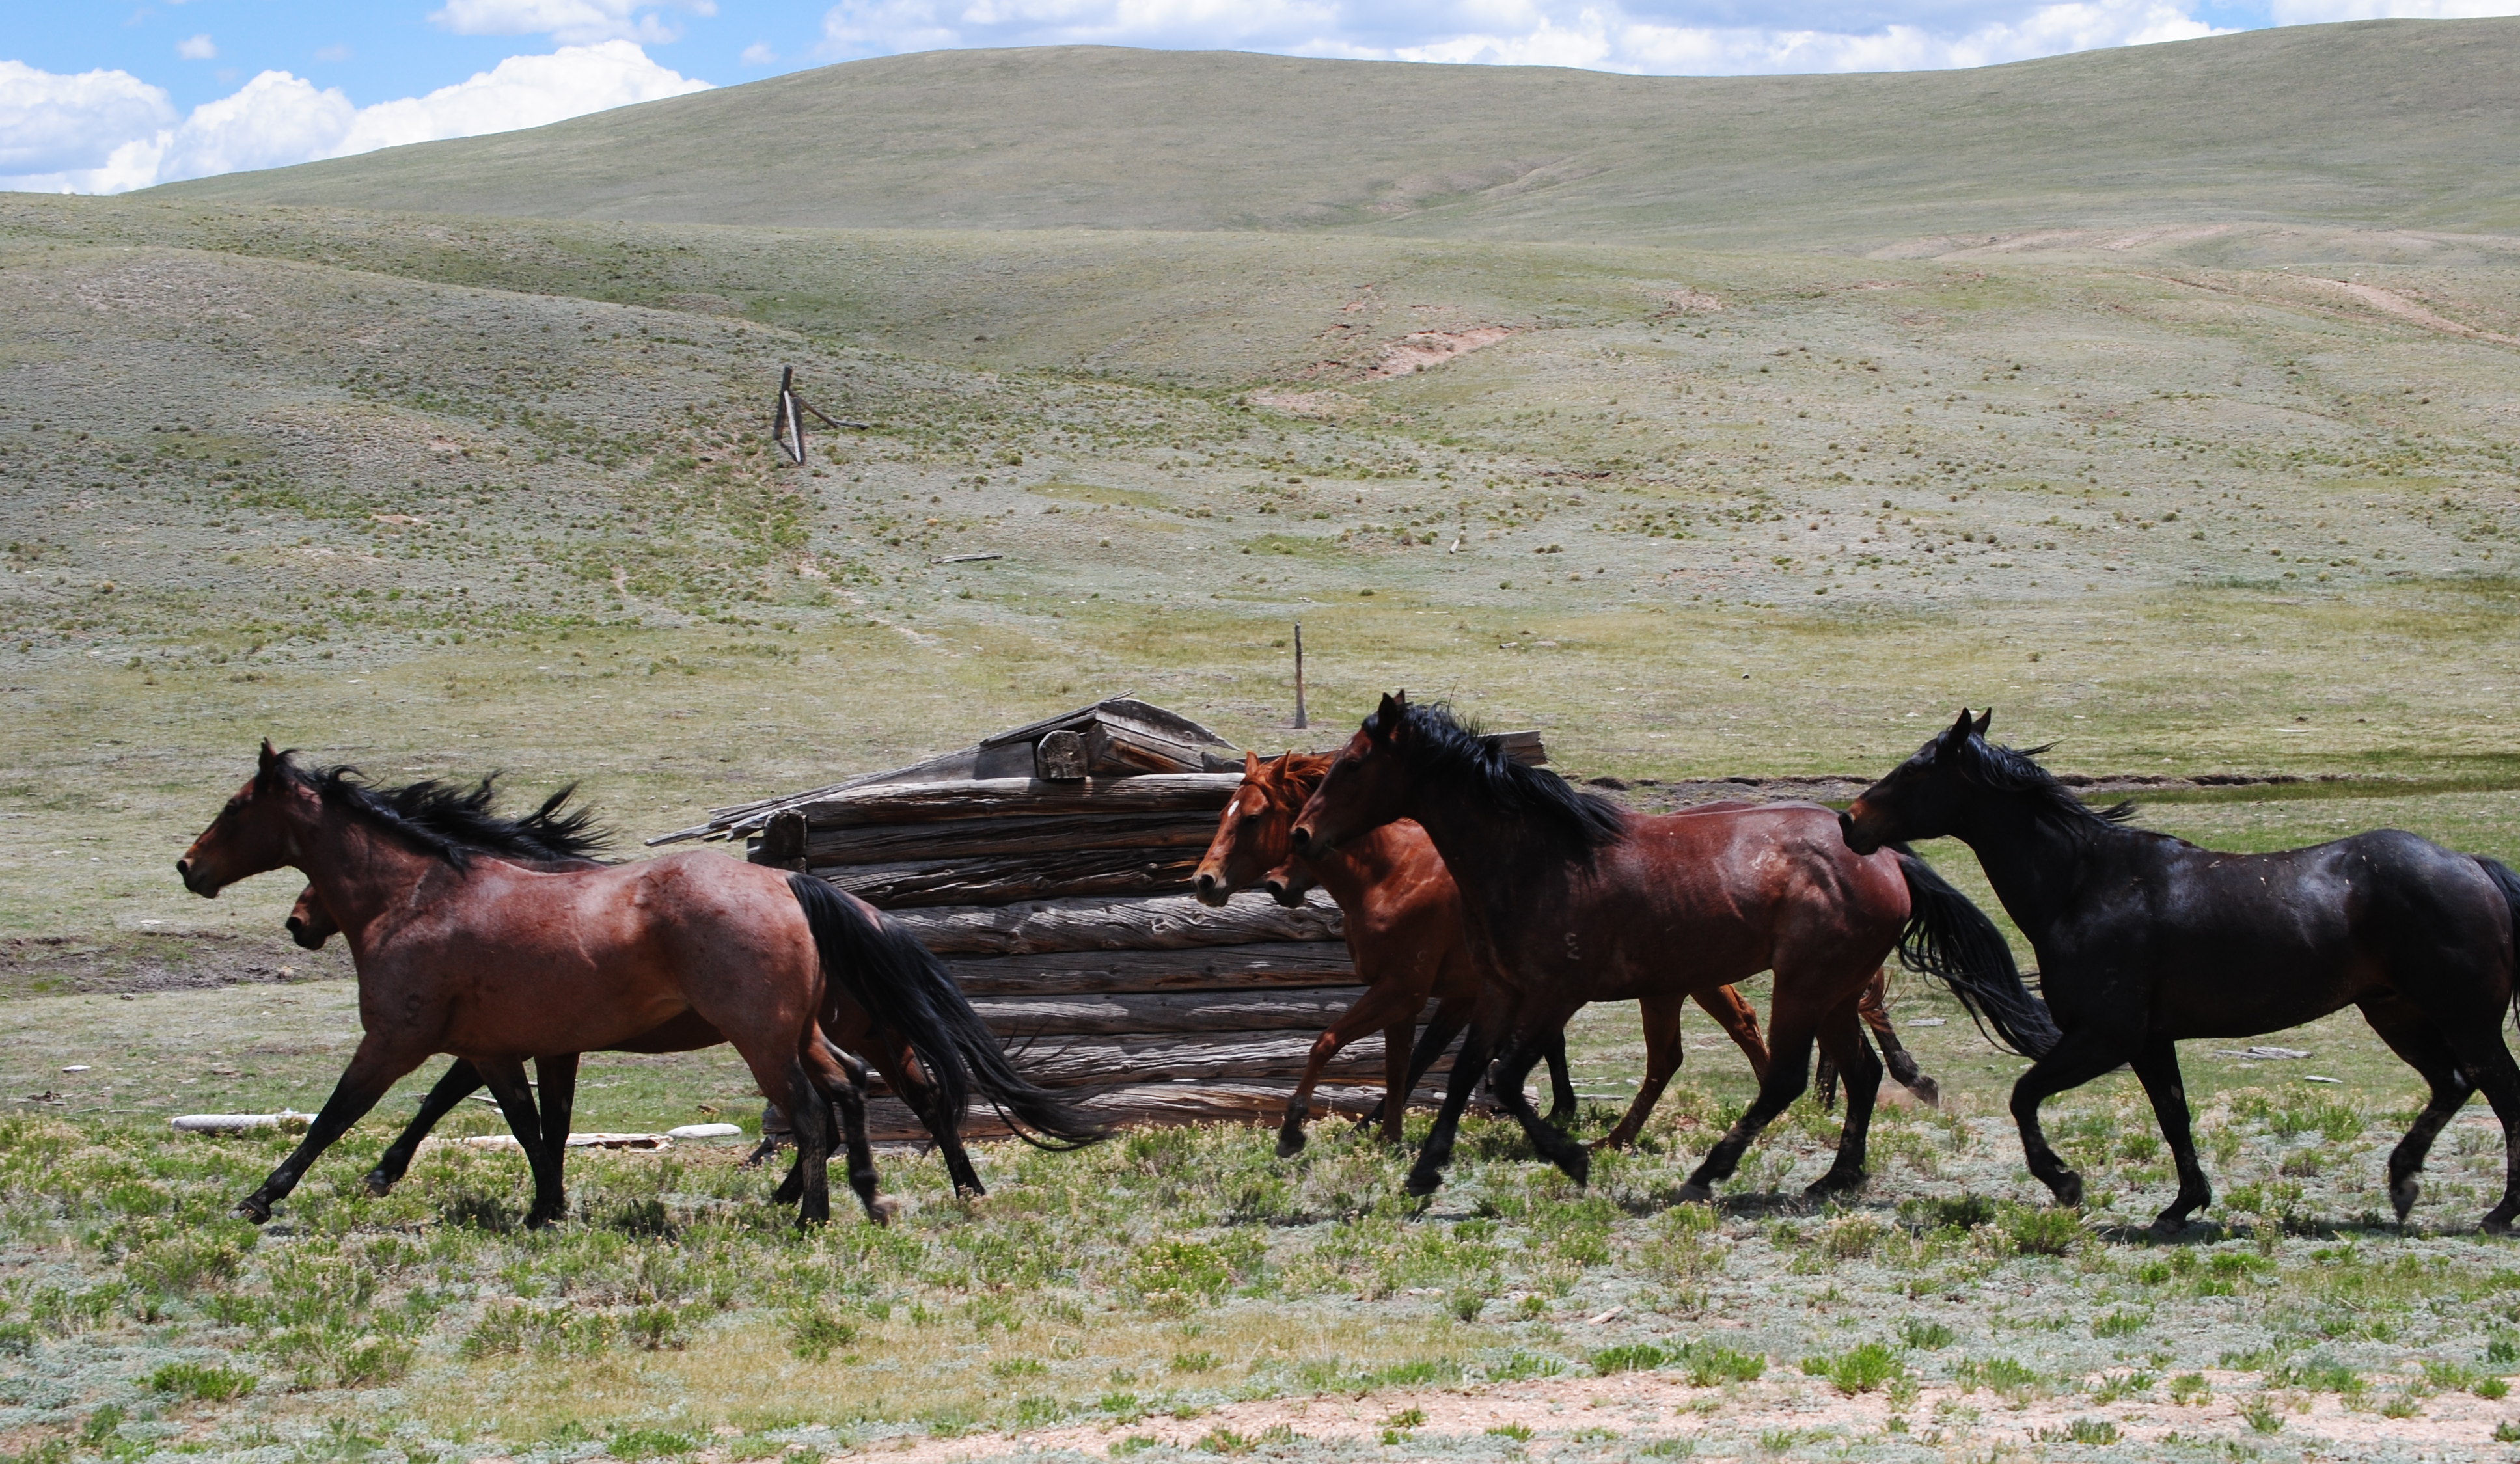 Horses - Gould Ranch Cattle Company